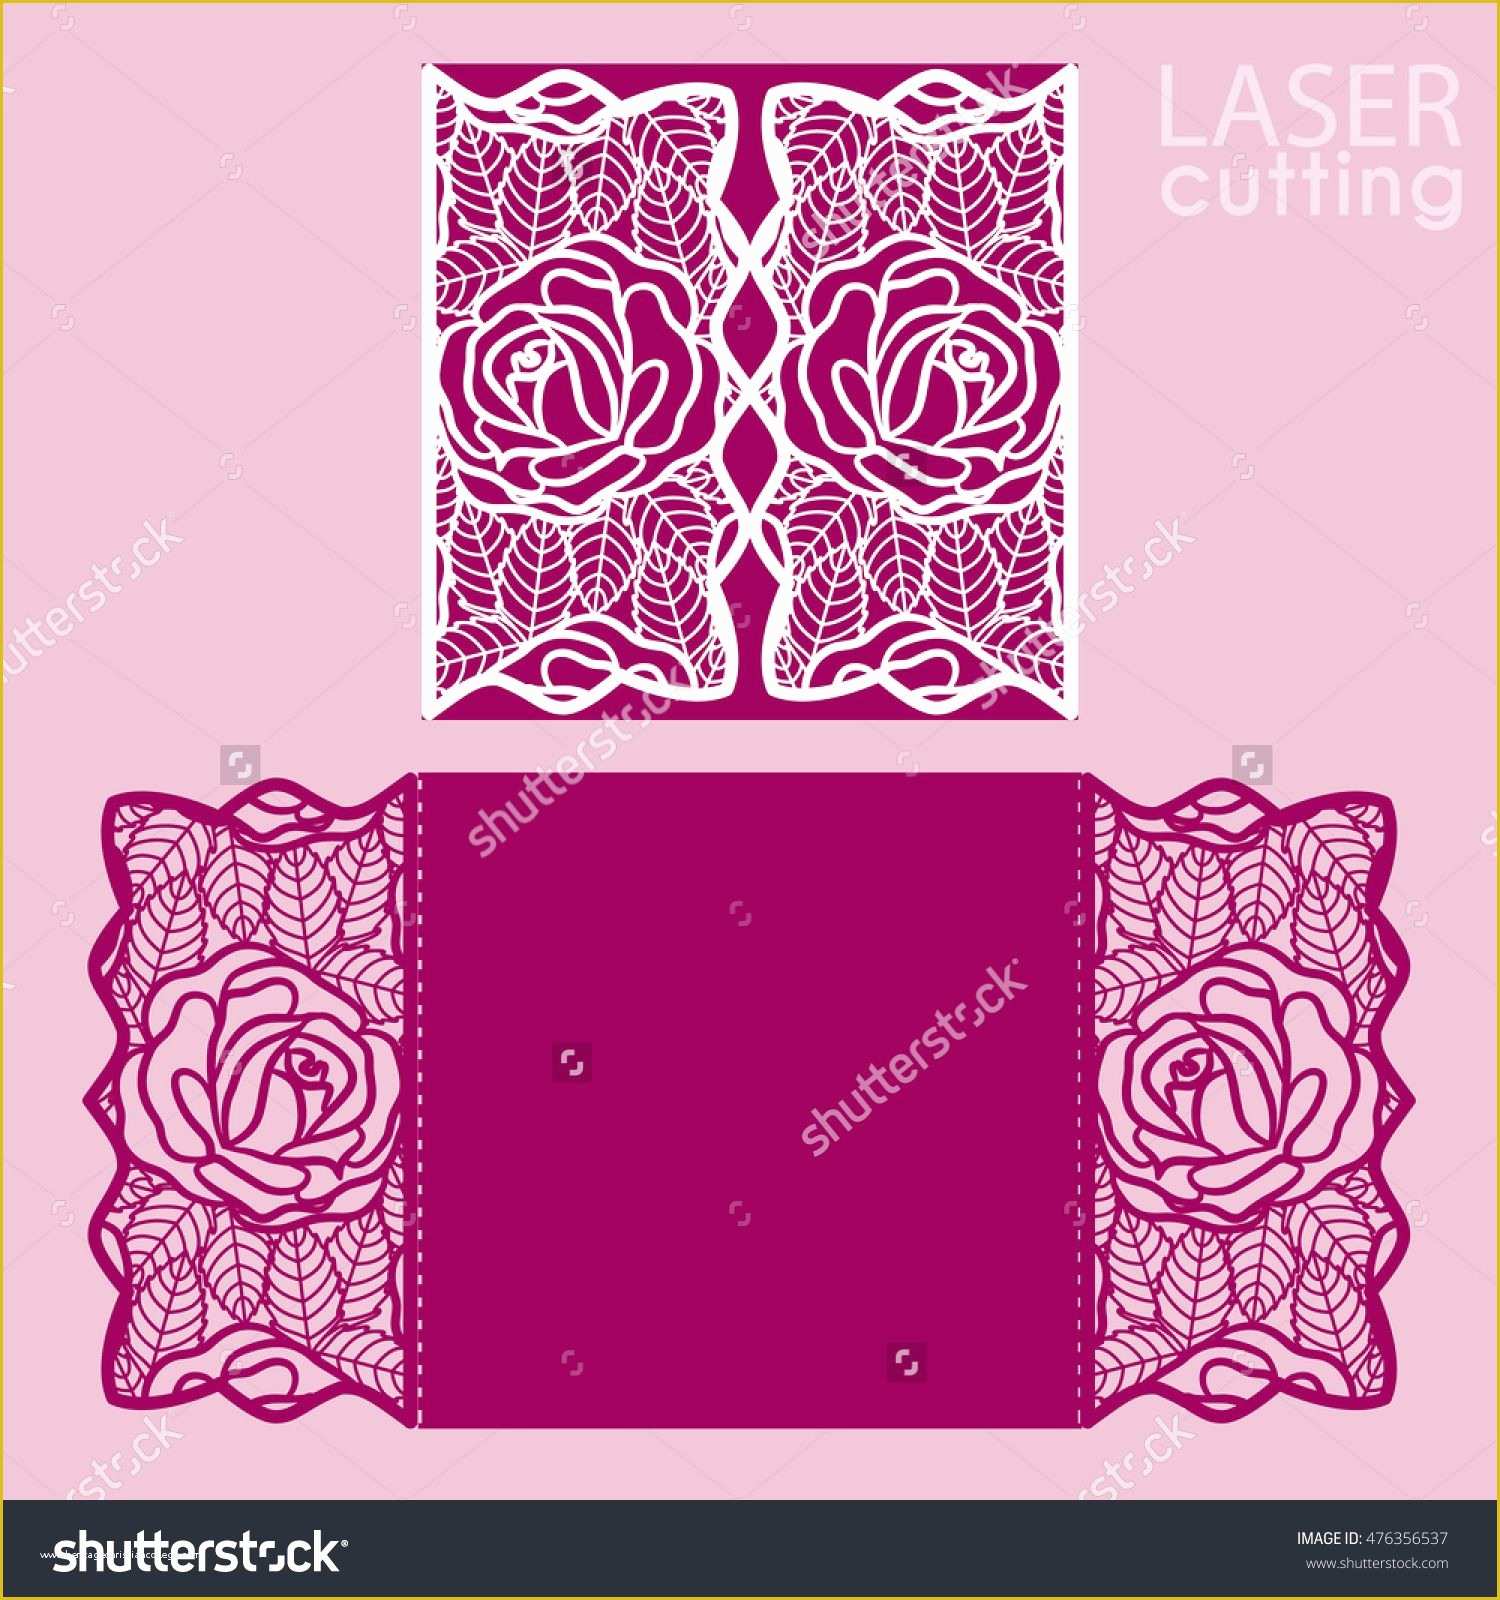 Free Laser Engraving Templates Of Laser Cut Wedding Invitation Card Template Vector Cut